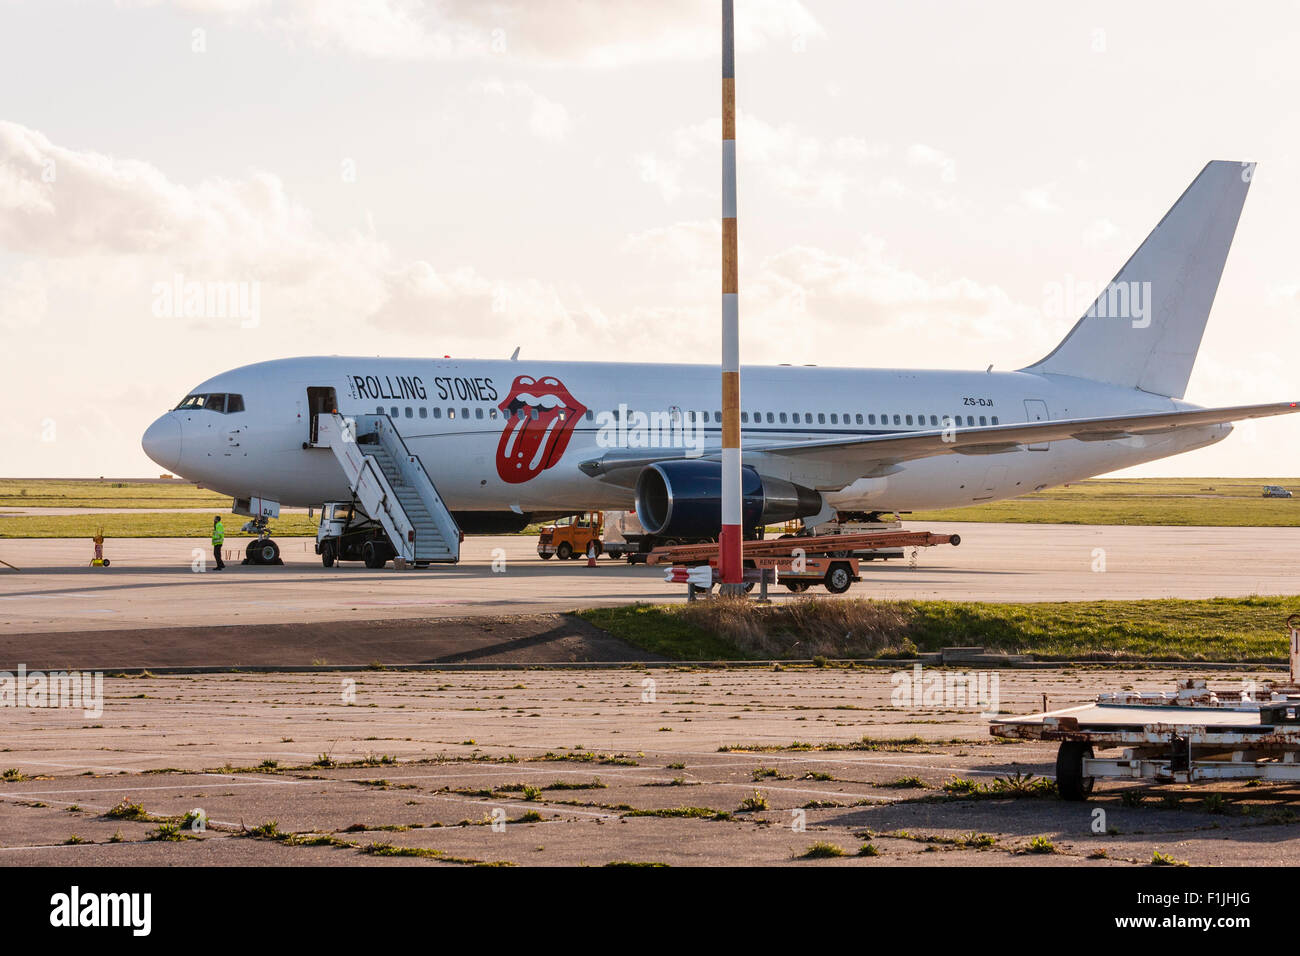 England, Manston airport. Rock and roll band, the Rolling stones Boeing 767, with lips and tongue logo on side in red, parked on apron with airstair. Stock Photo